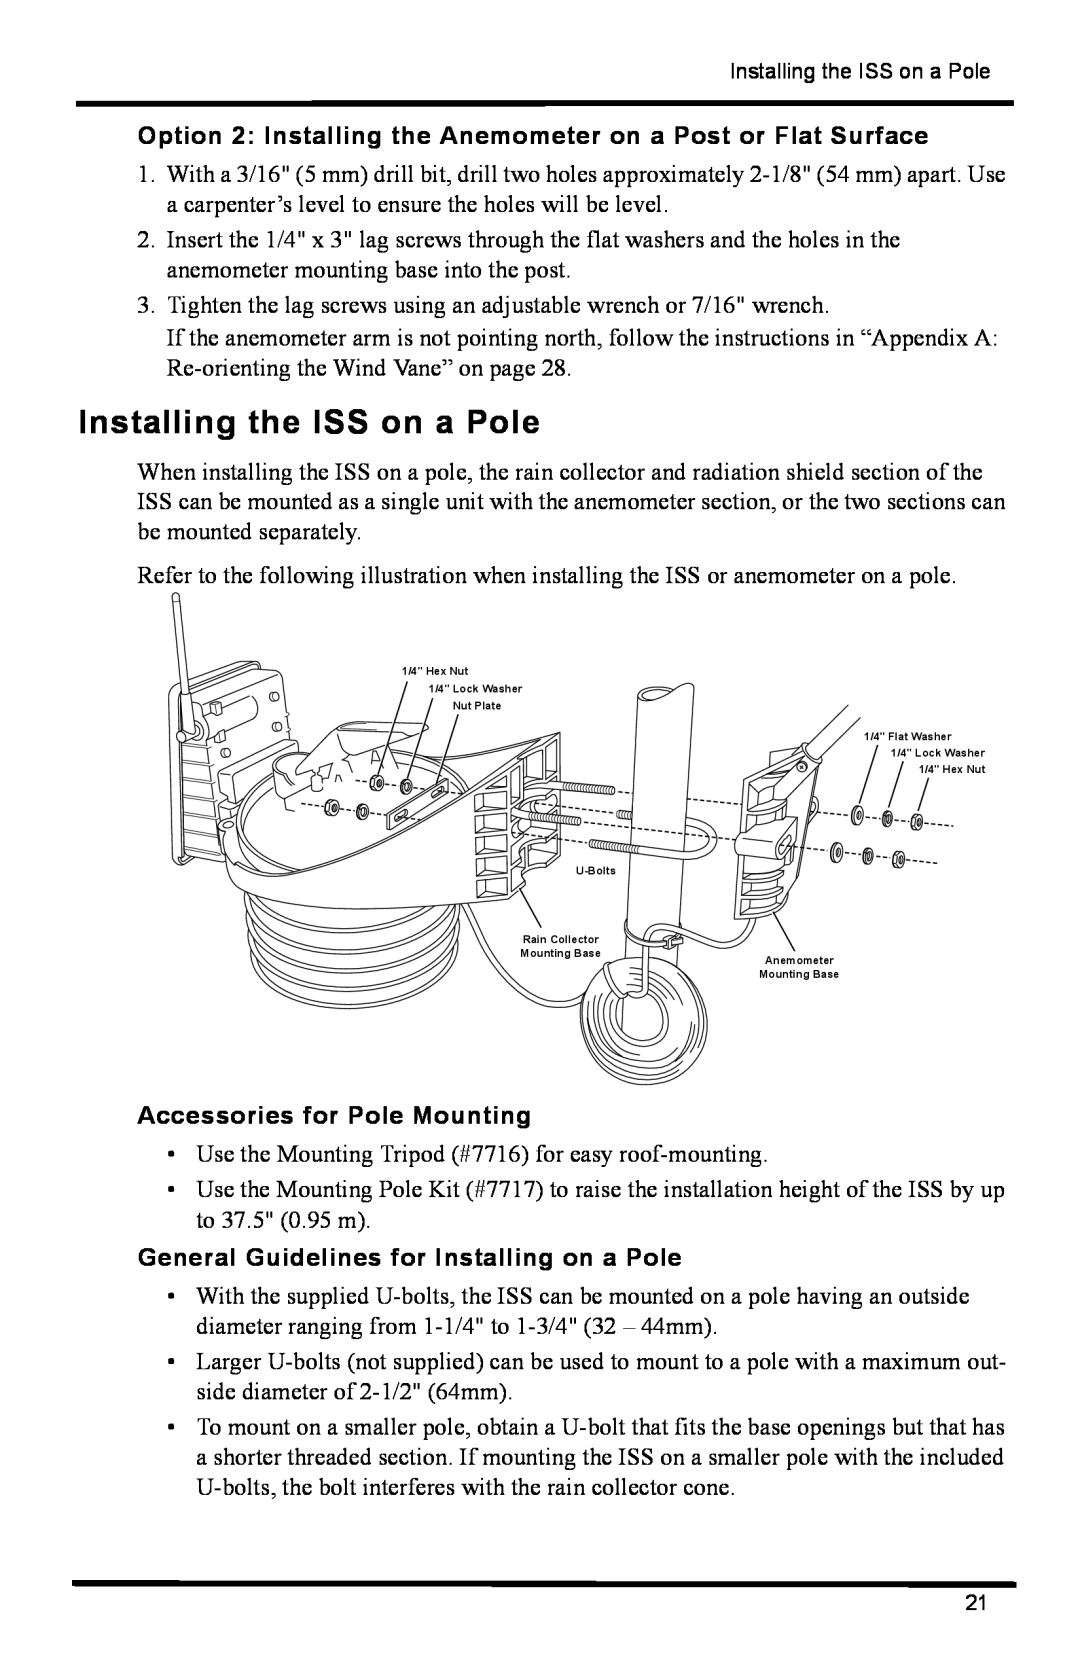 DAVIS 6322C Installing the ISS on a Pole, Accessories for Pole Mounting, General Guidelines for Installing on a Pole 